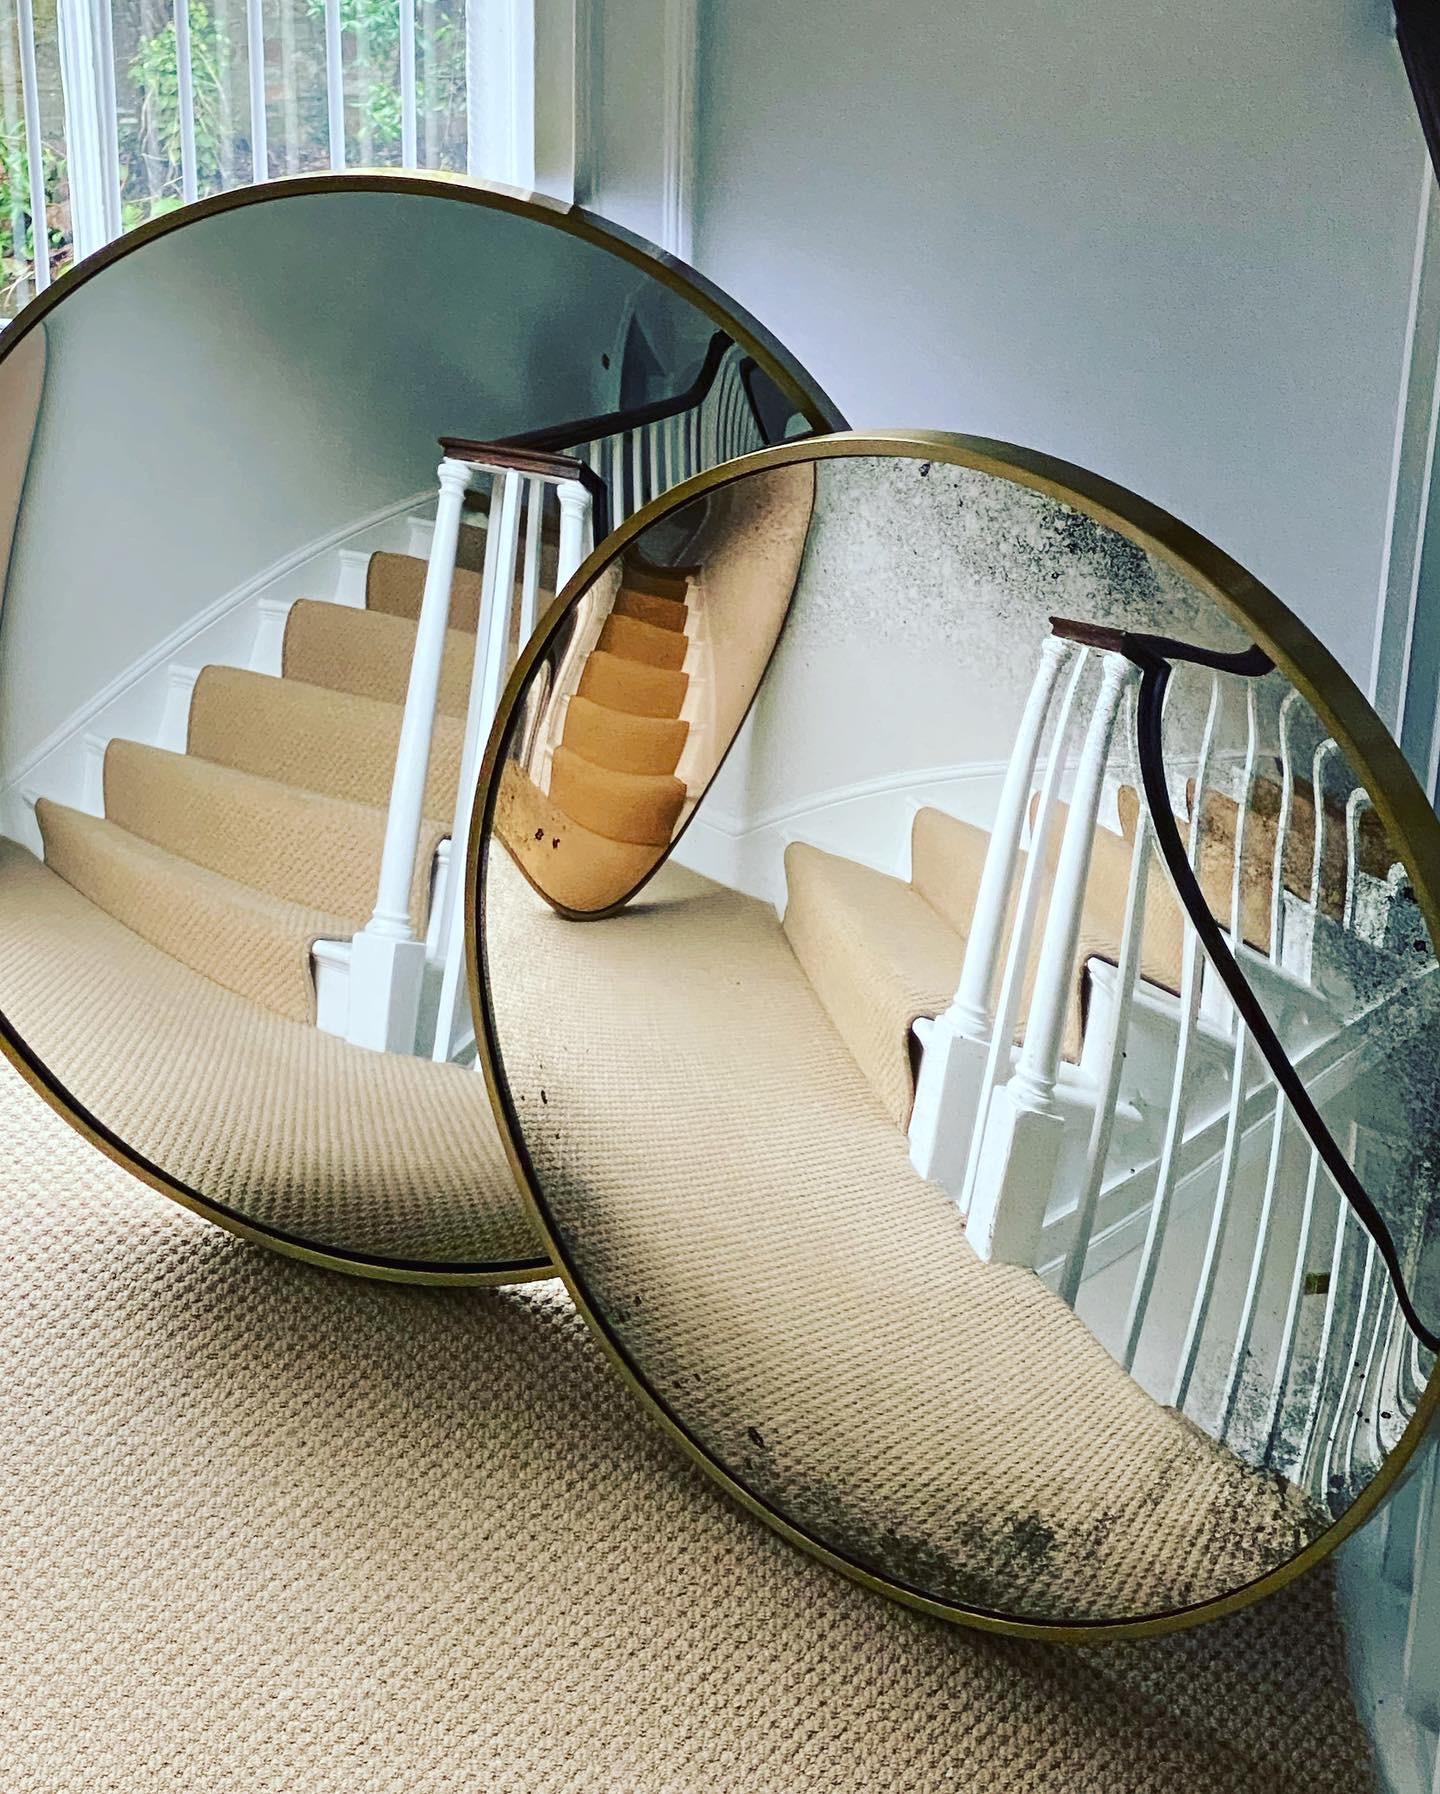 The Ferrara convex mirror is a highly decorative convex wall mirror that creates a focal point and adds elegance to any room. The mirror itself is silvered using traditional methods and fabricated from 6mm low iron glass with a curvature of 7 cms.